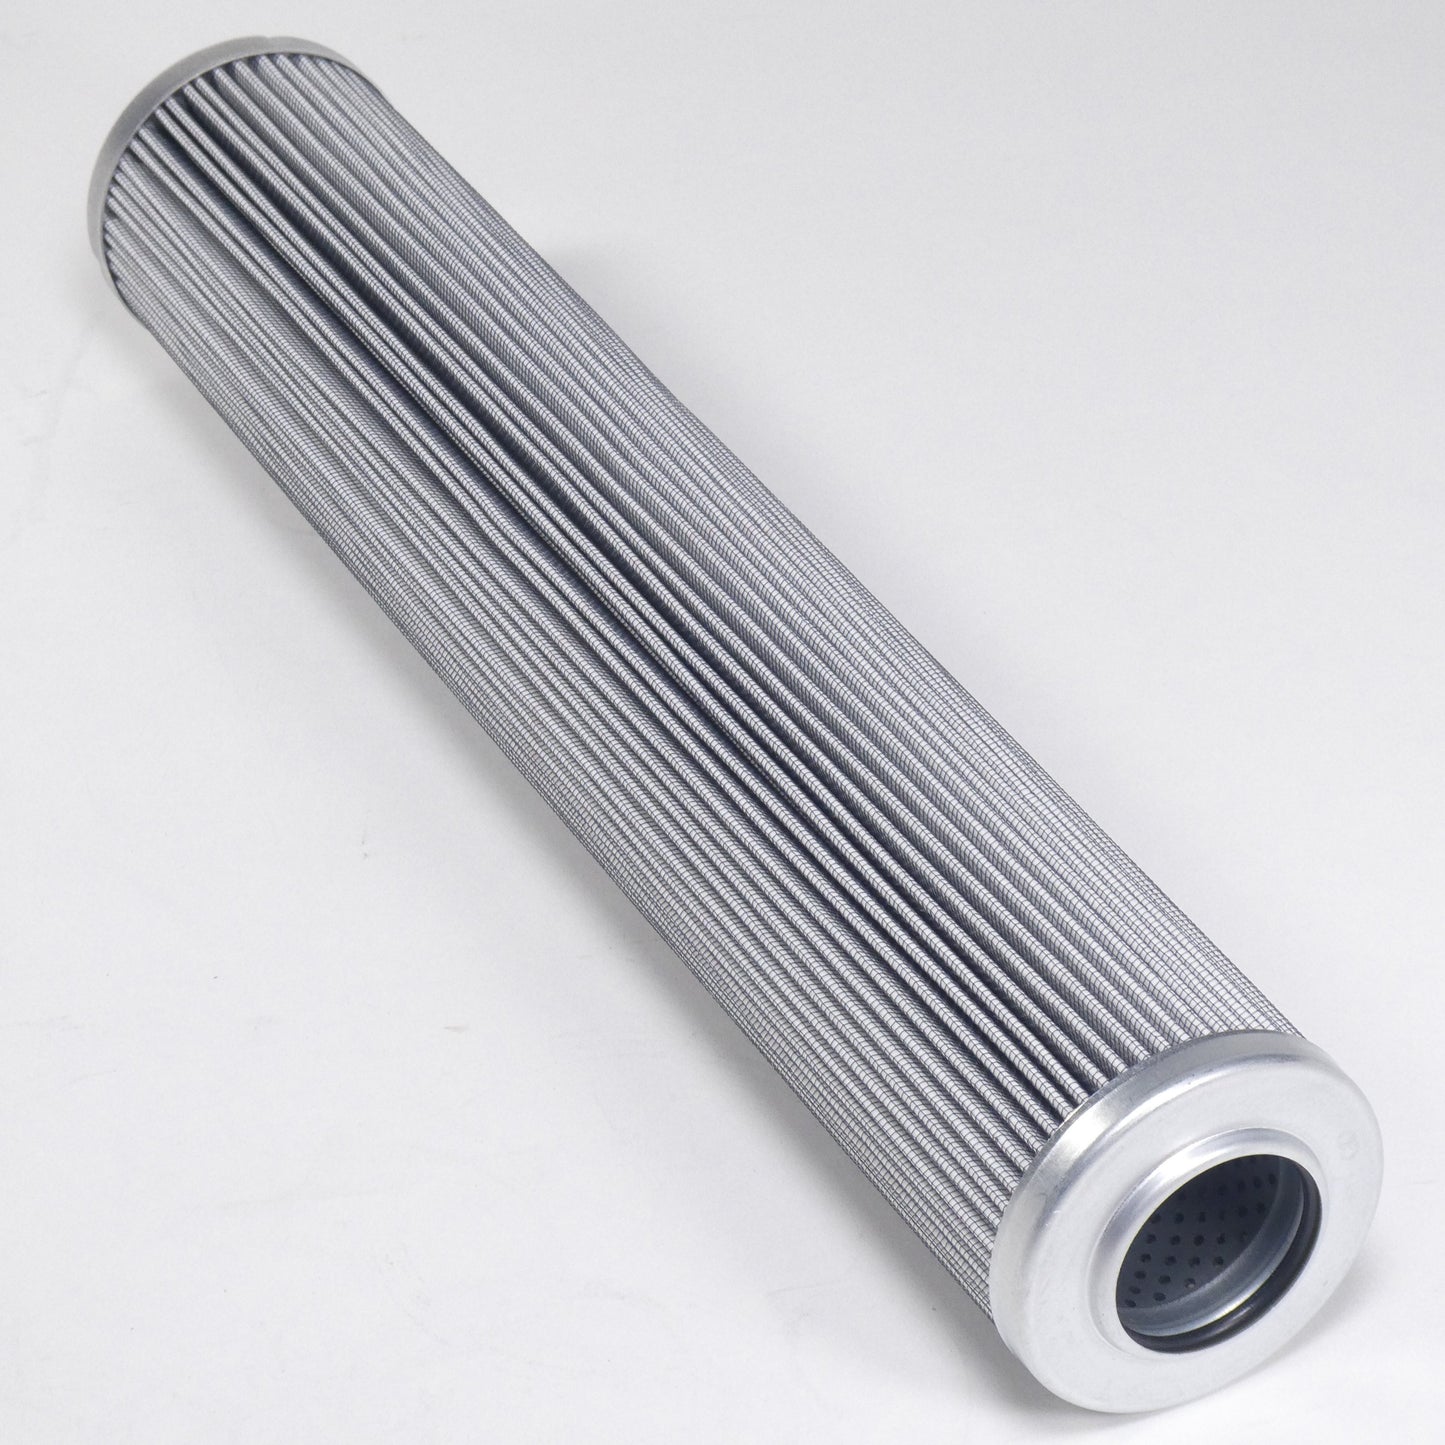 Hydrafil Replacement Filter Element for Pall HC9600FCZ16H